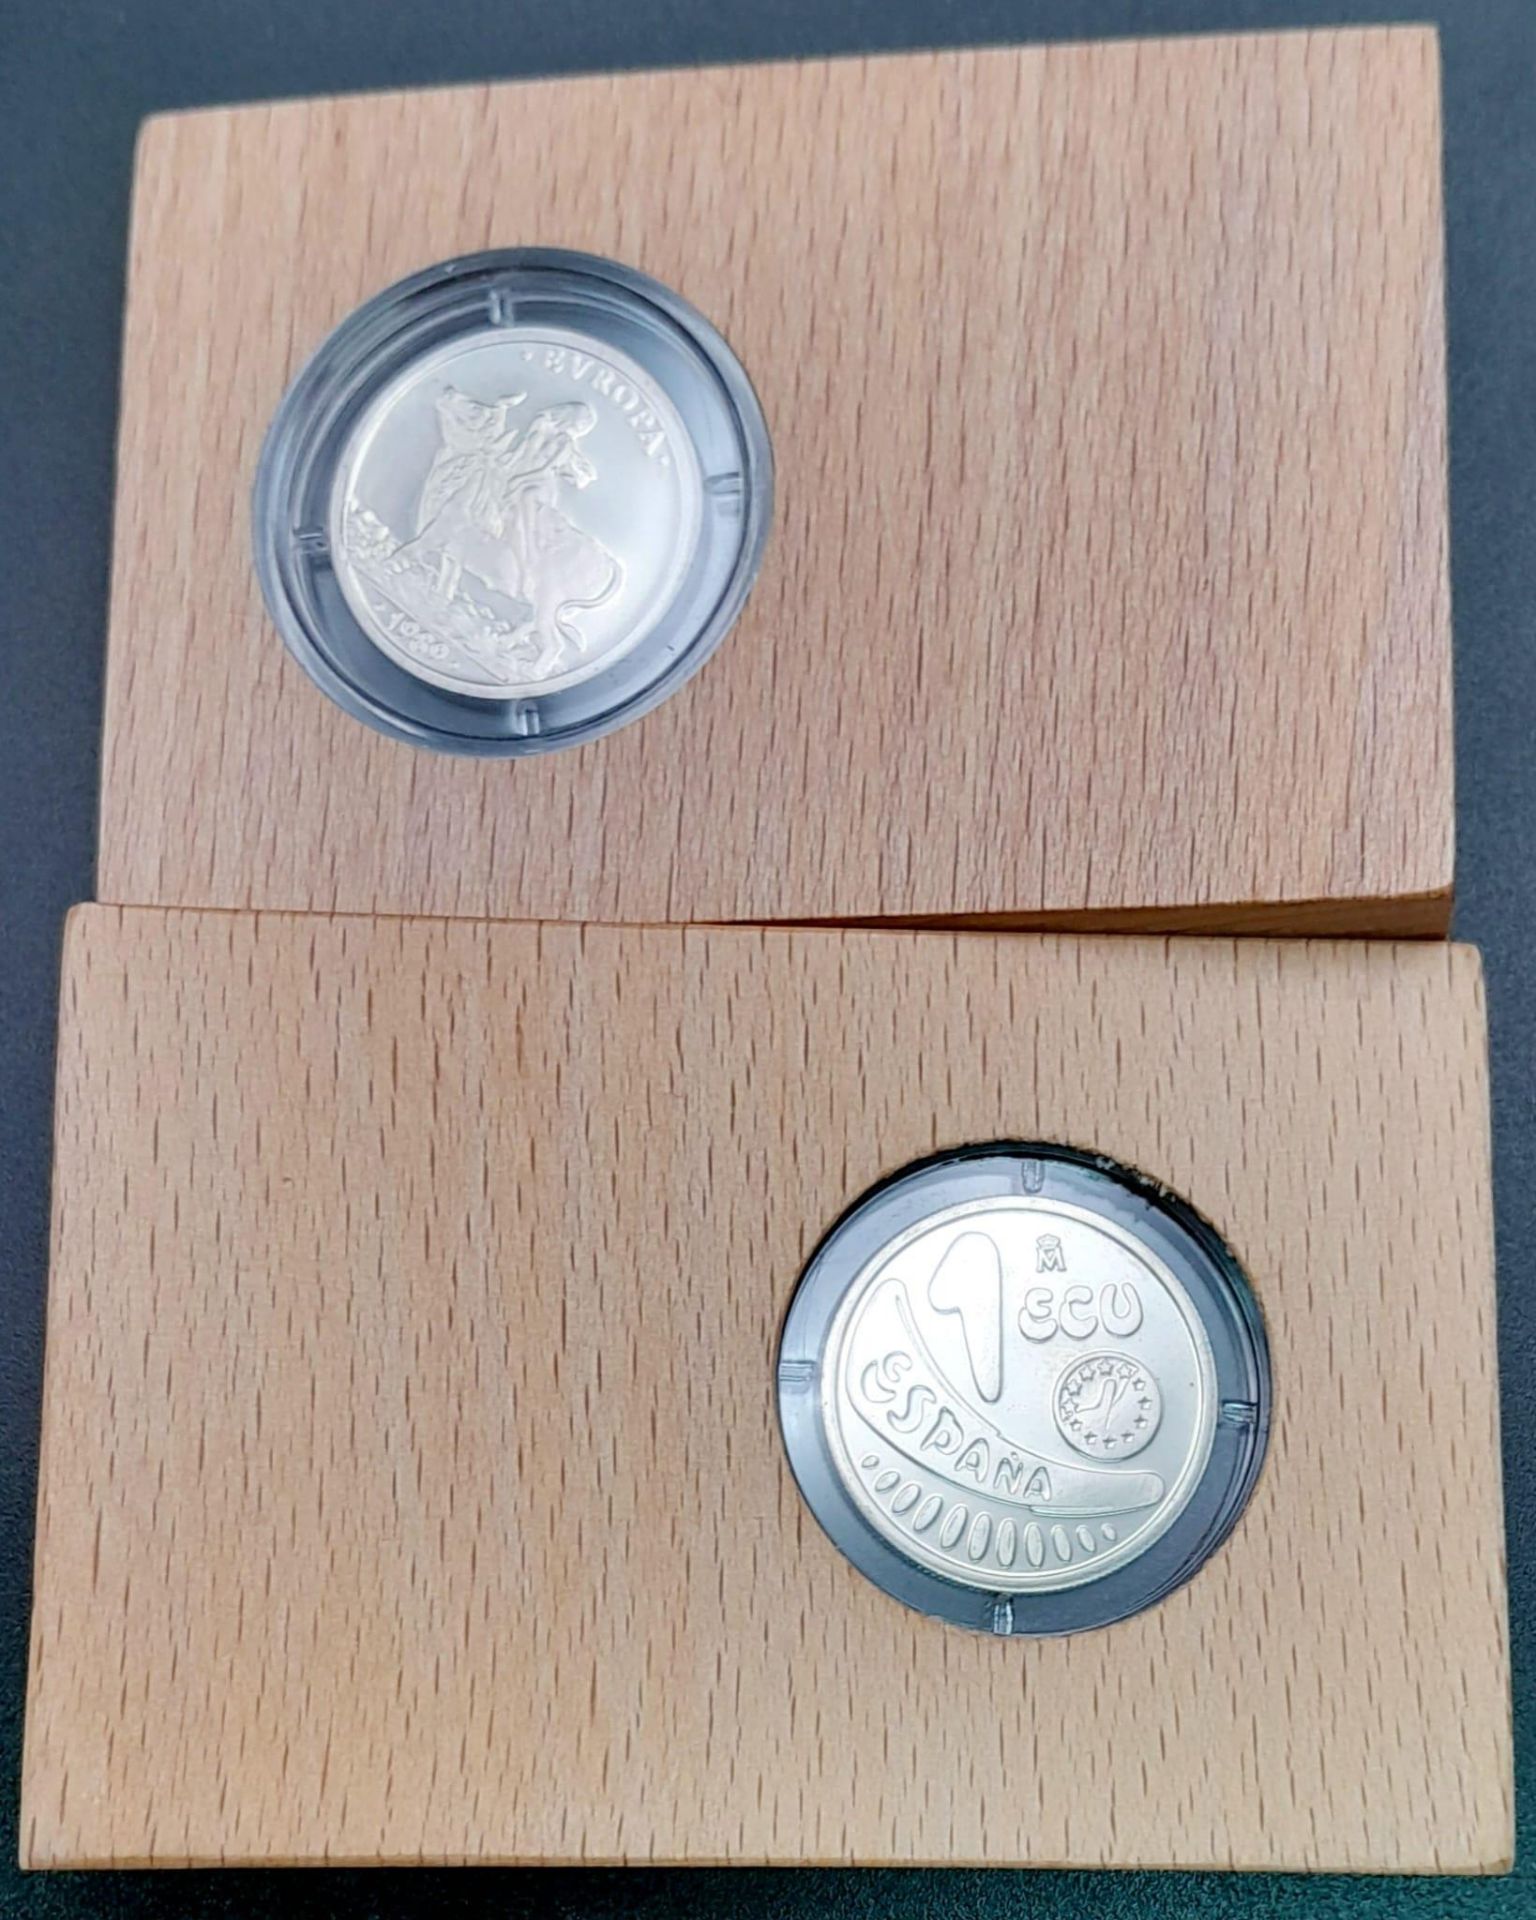 Two Uncirculated 925 Silver 1 ECU Coins in Capsules with Certificate of Authenticity in Wood Display - Image 3 of 3